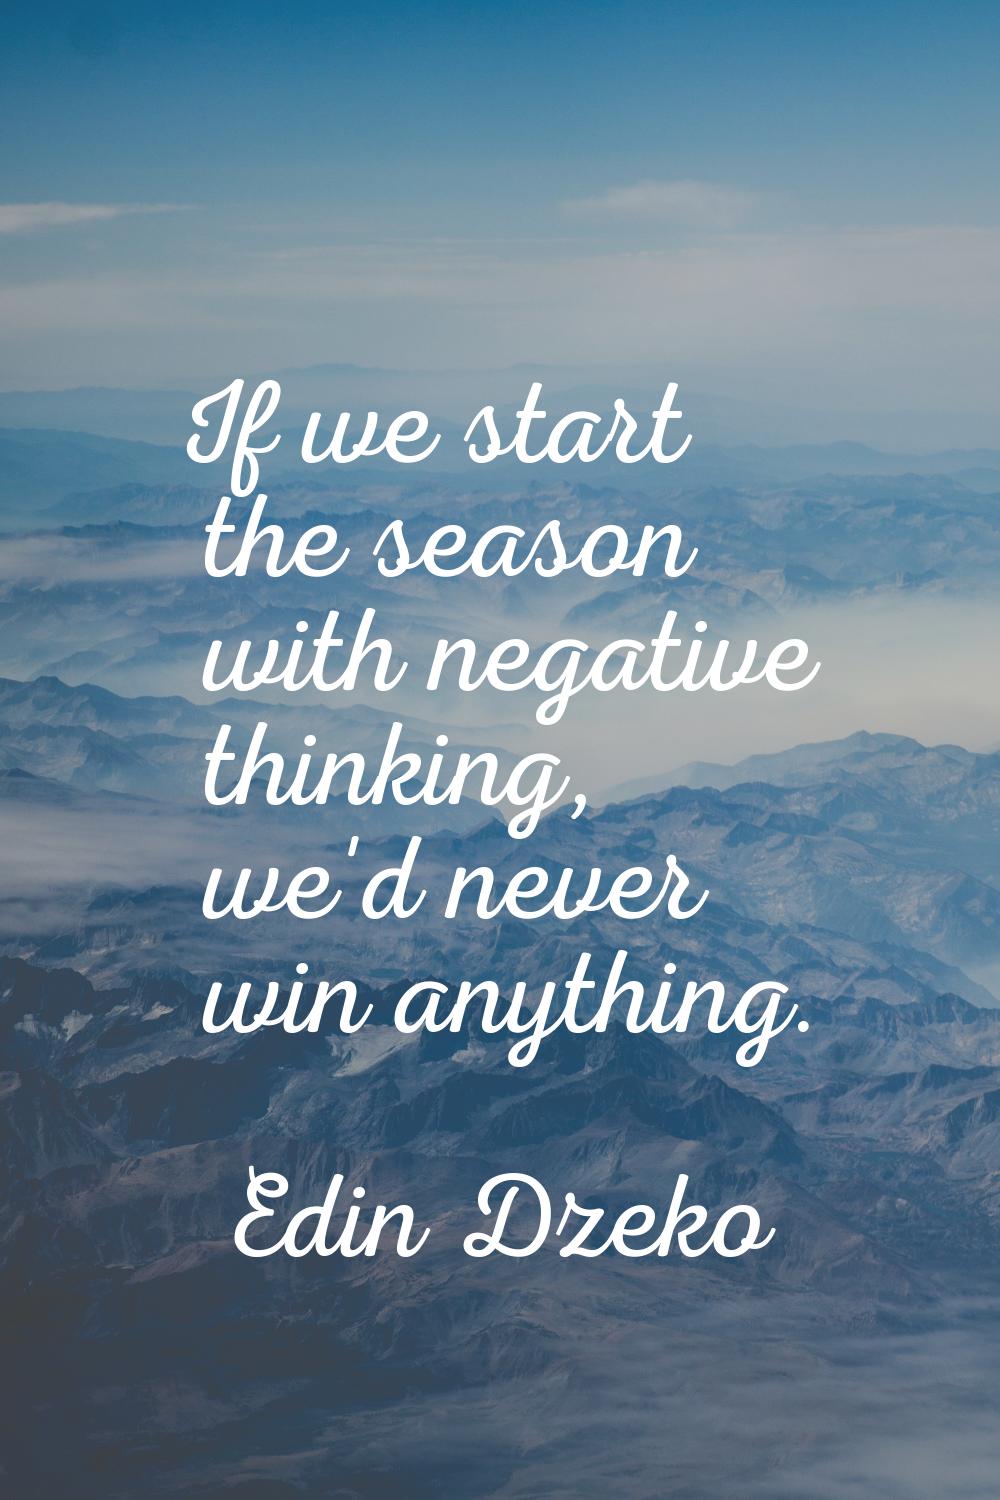 If we start the season with negative thinking, we'd never win anything.